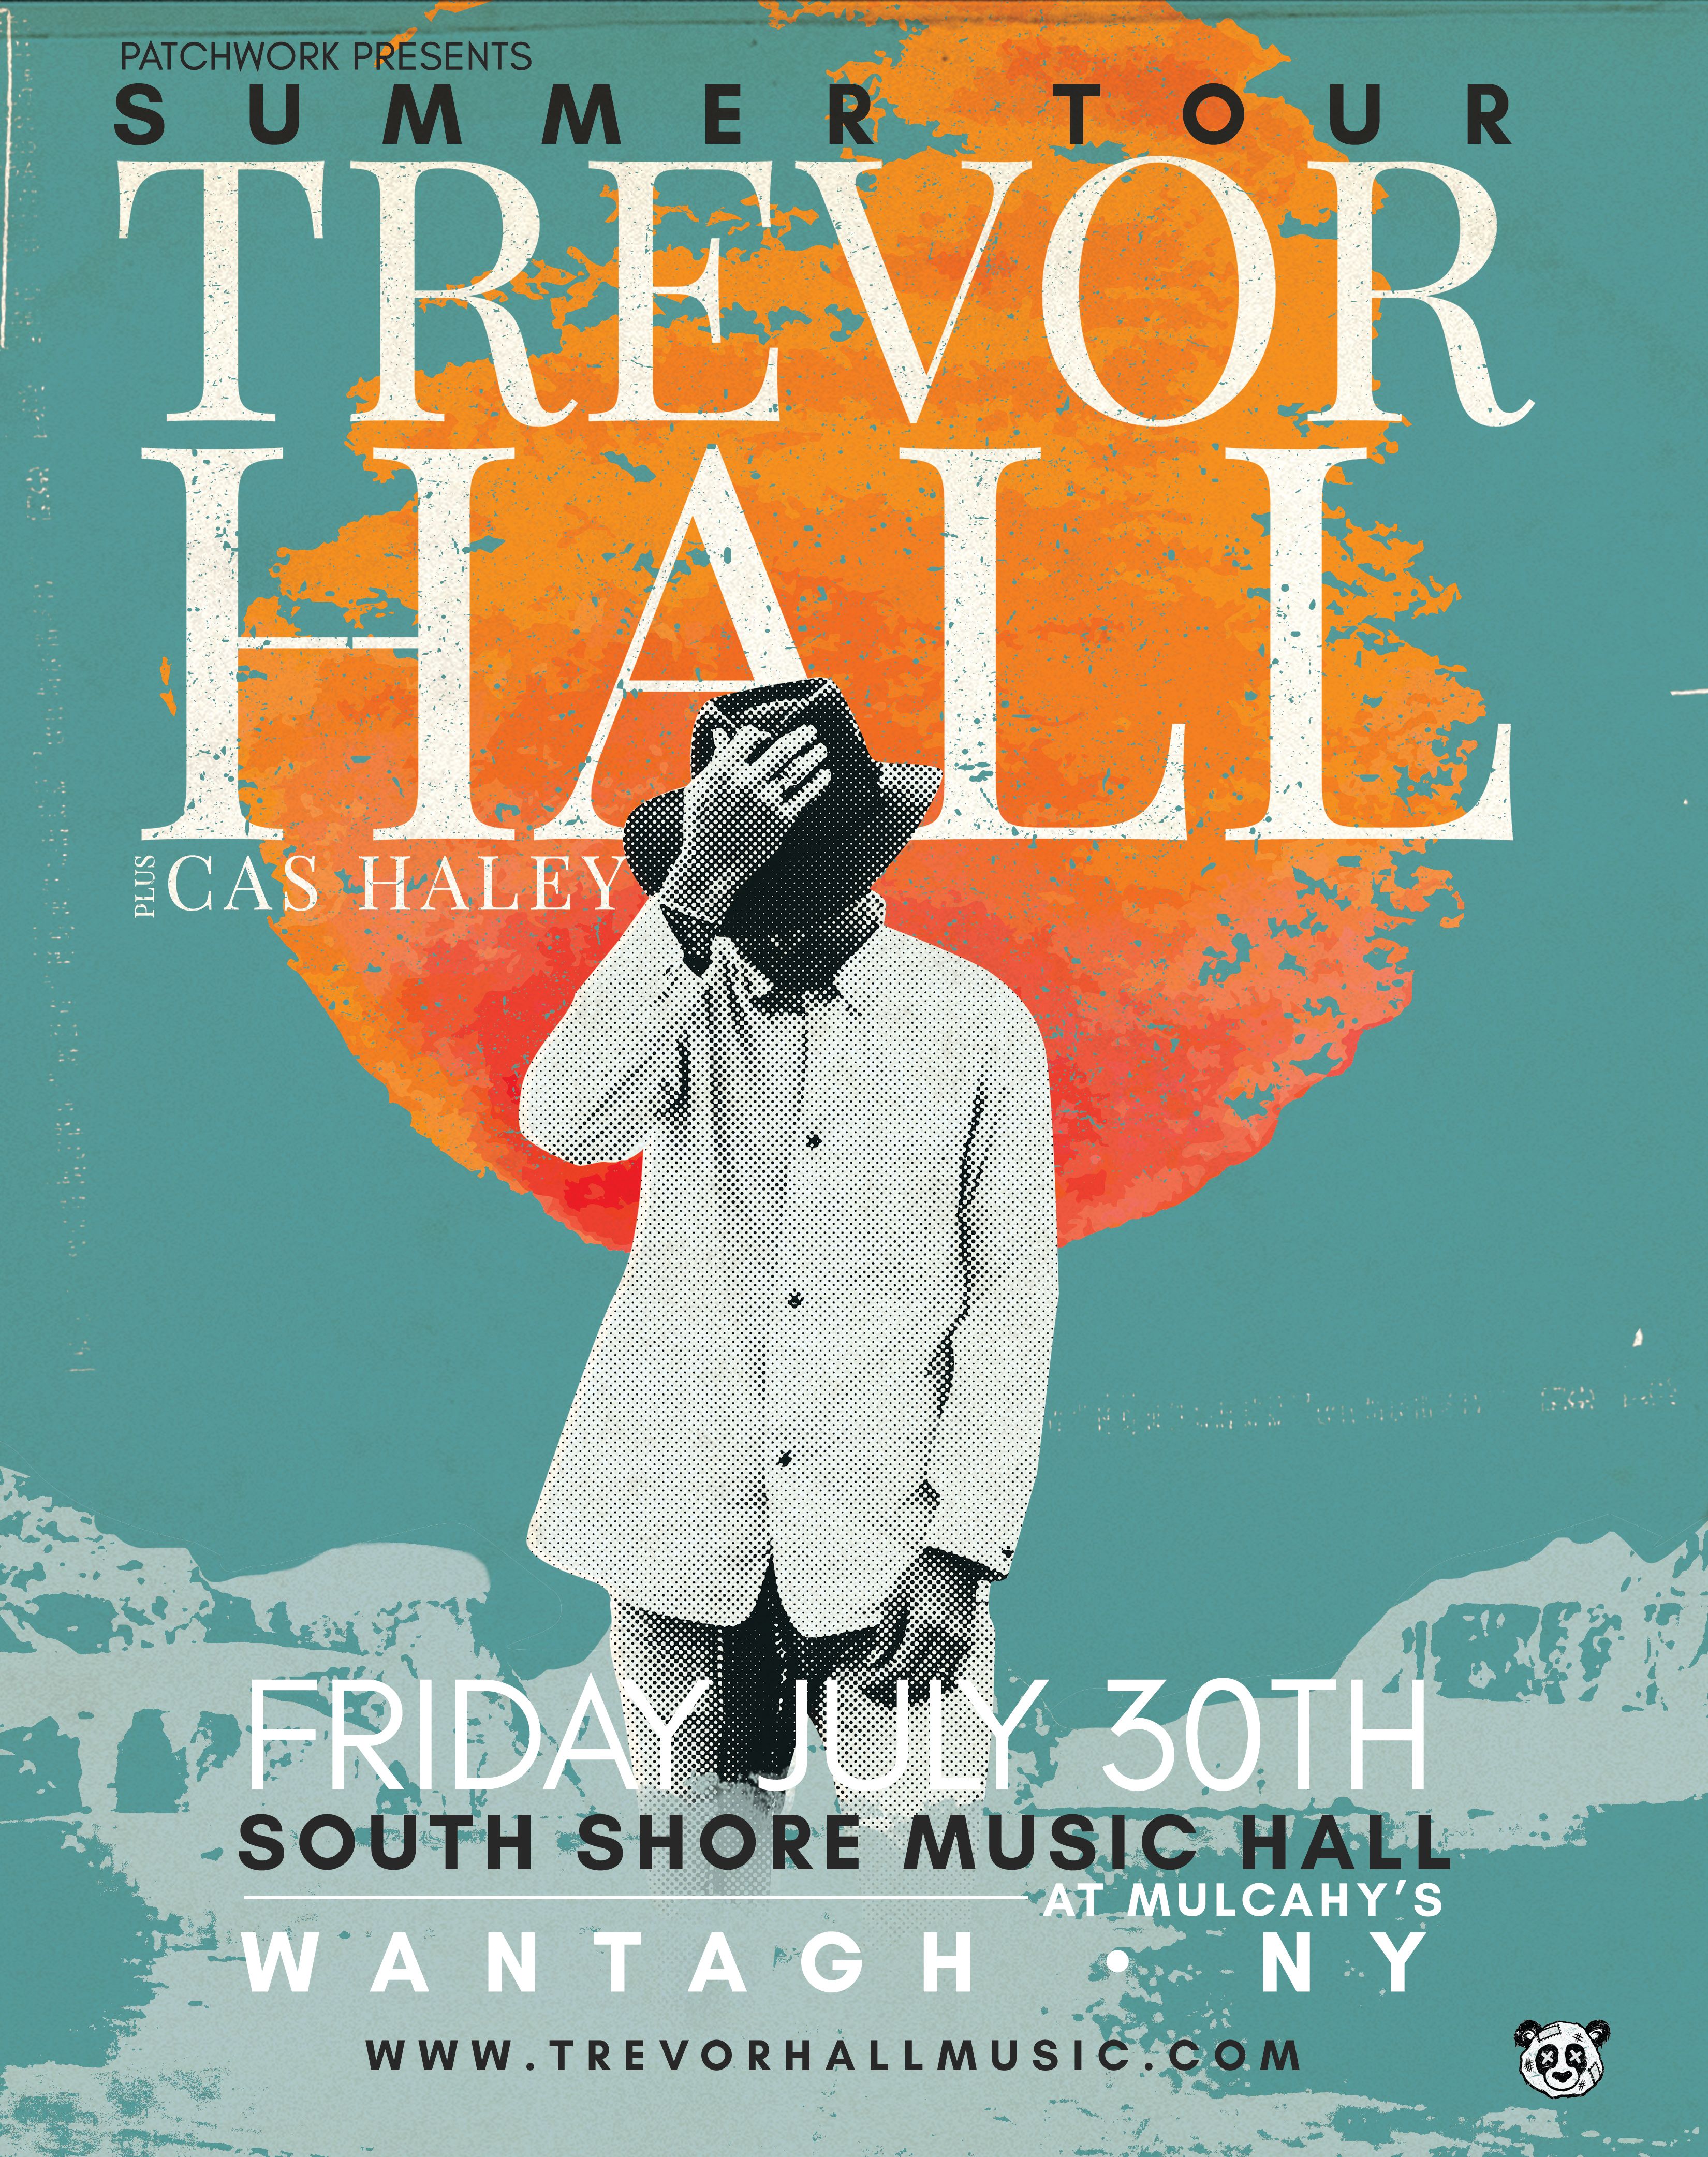 Buy Tickets to Trevor Hall in Wantagh on Jul 30, 2021